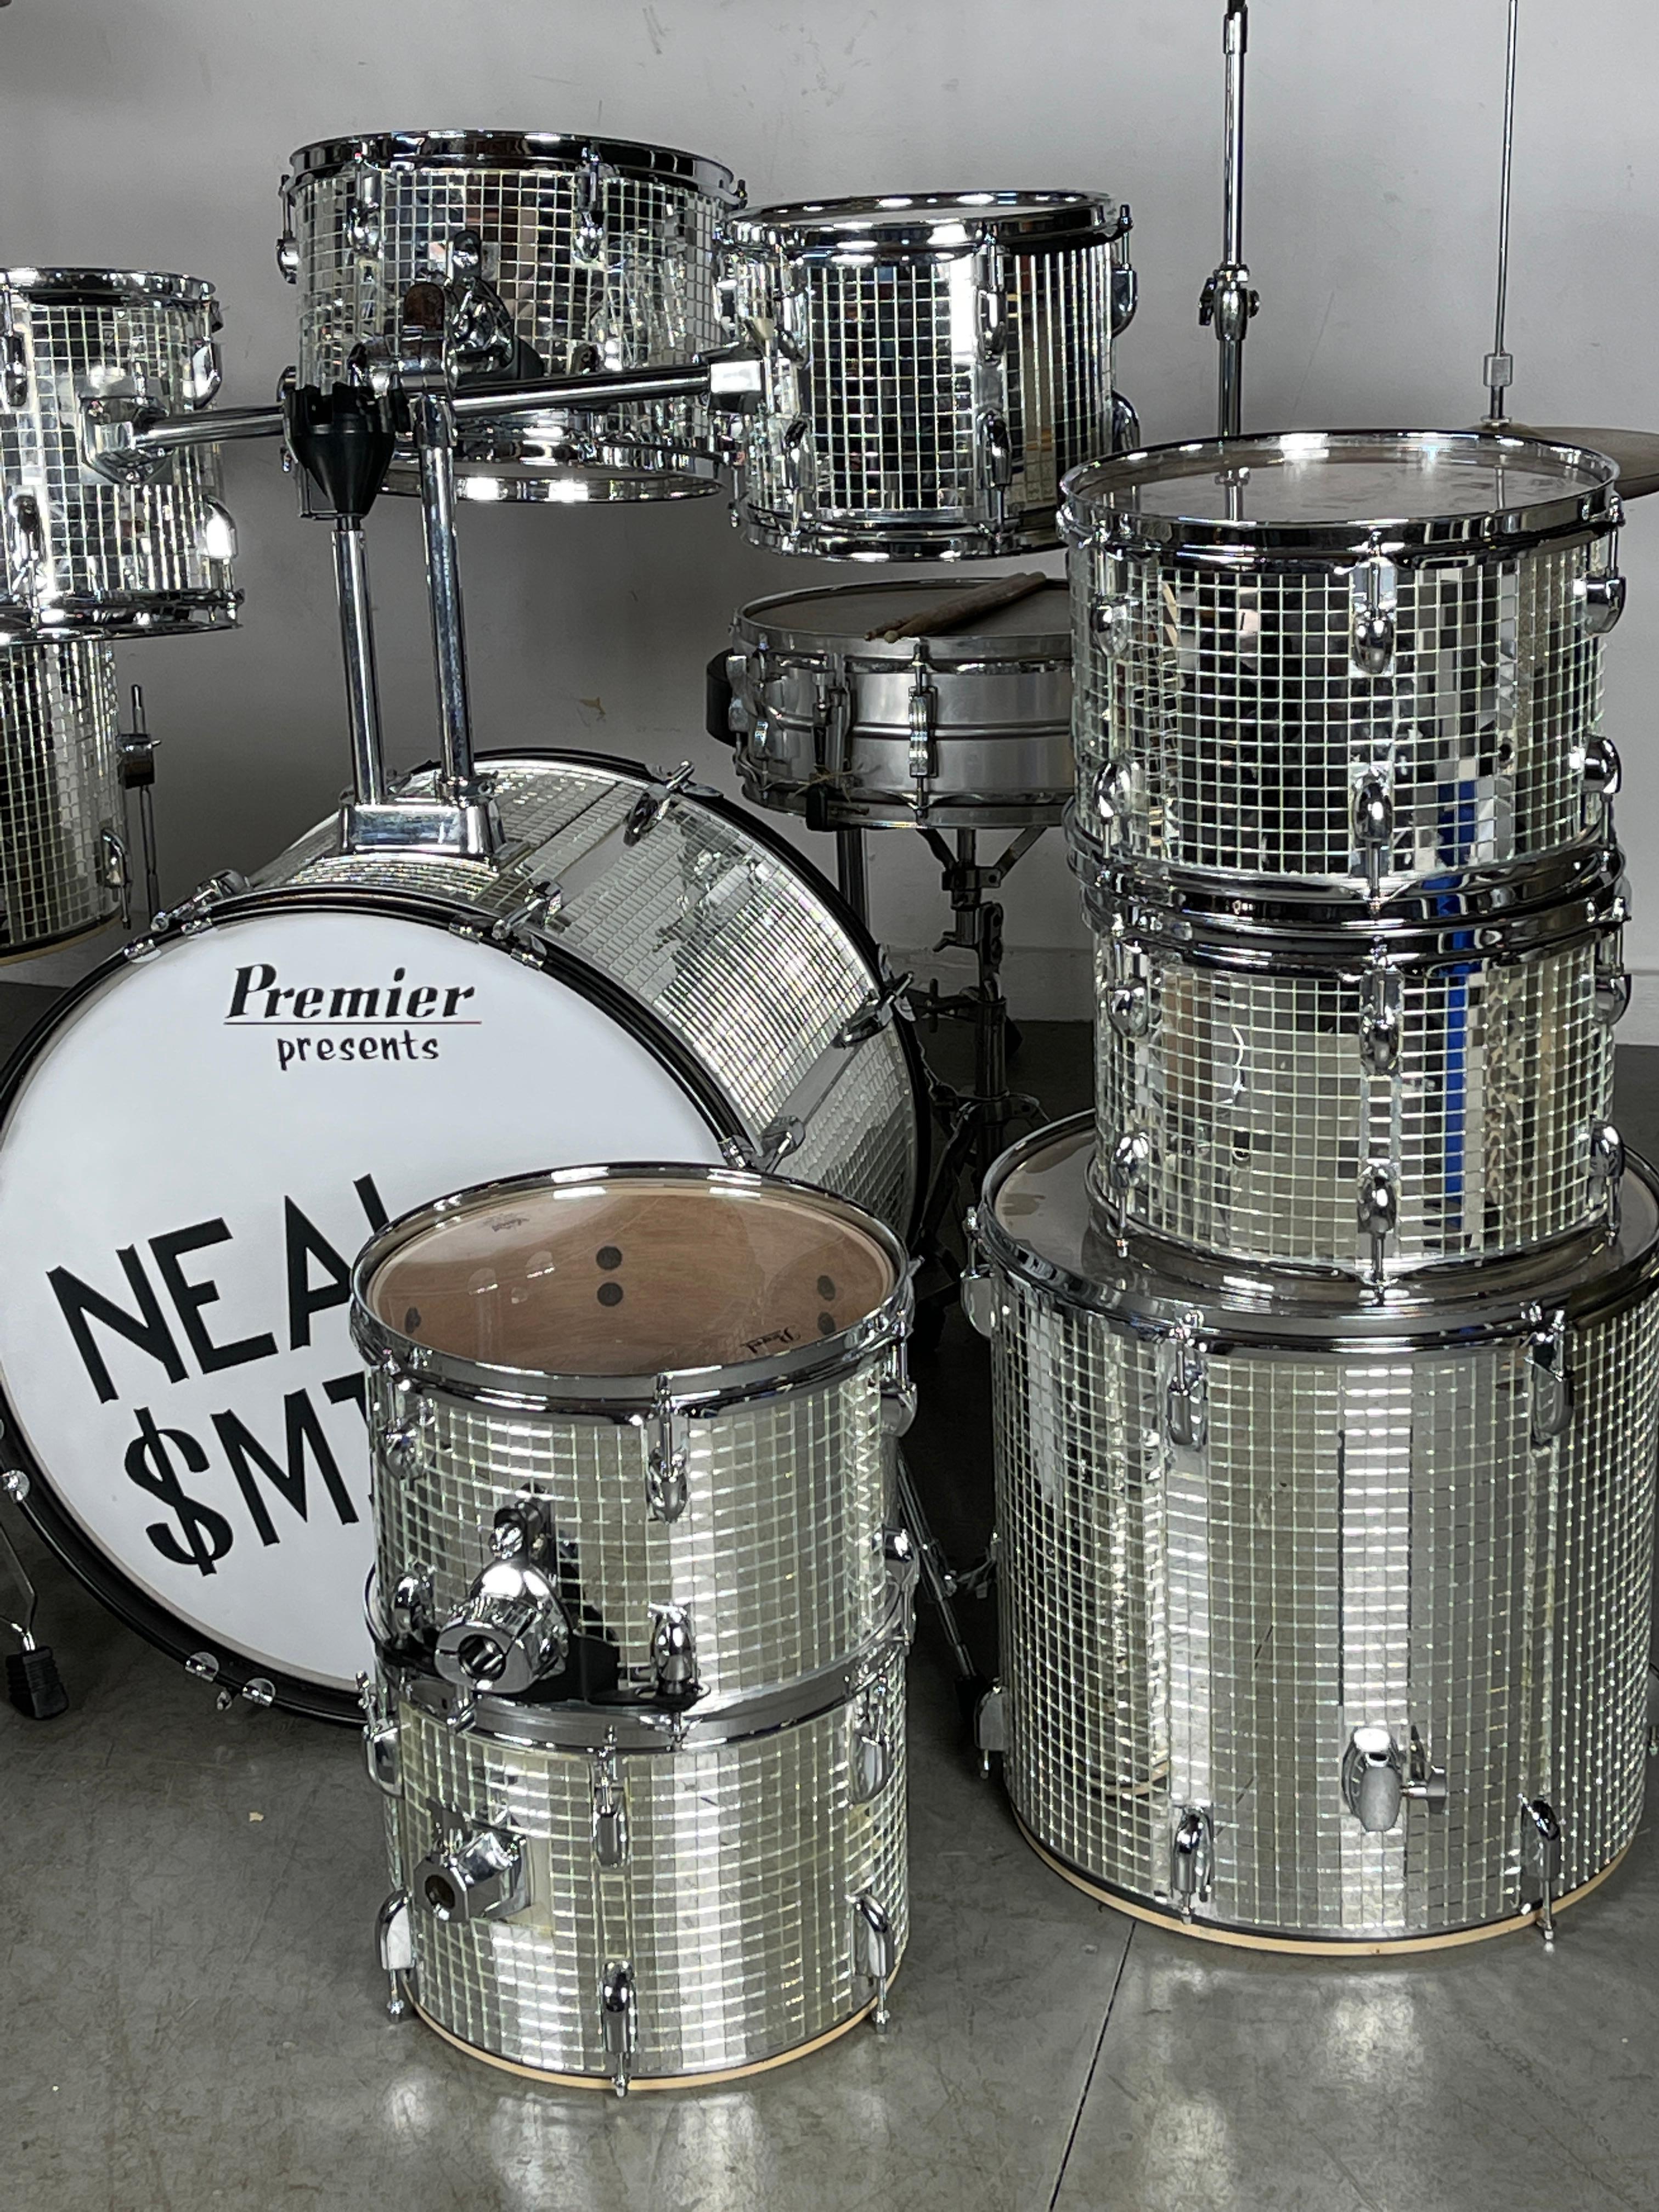 Custom Pearl Drums,, made and designed for the H B O series 